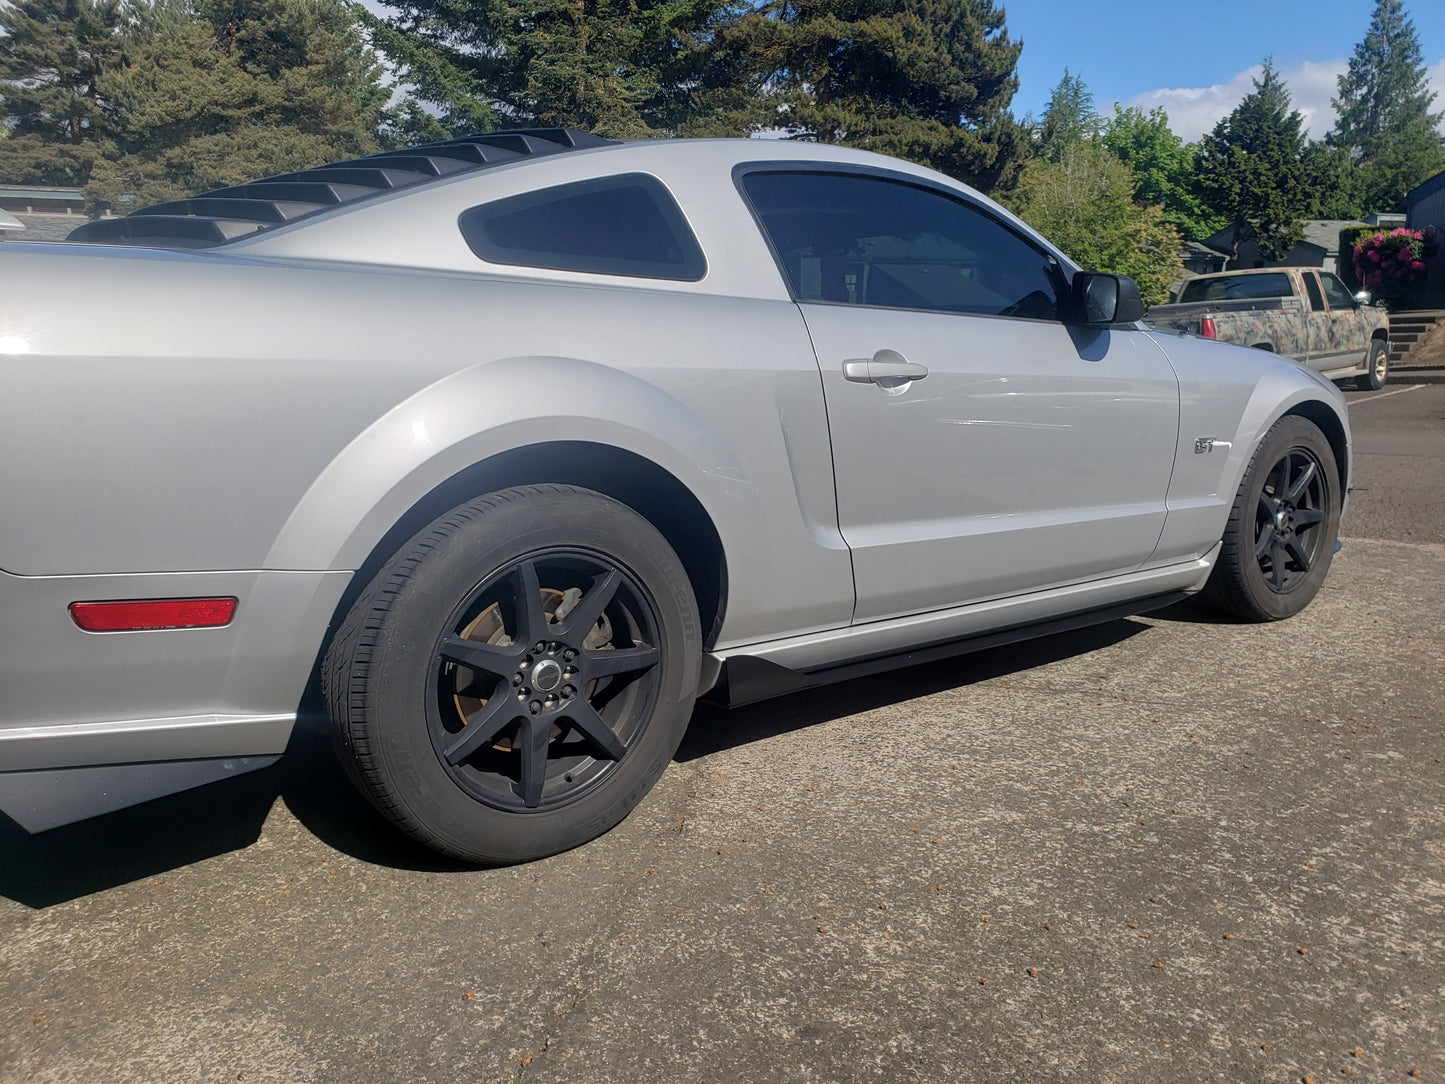 Ford Mustang Sideskirt Extensions